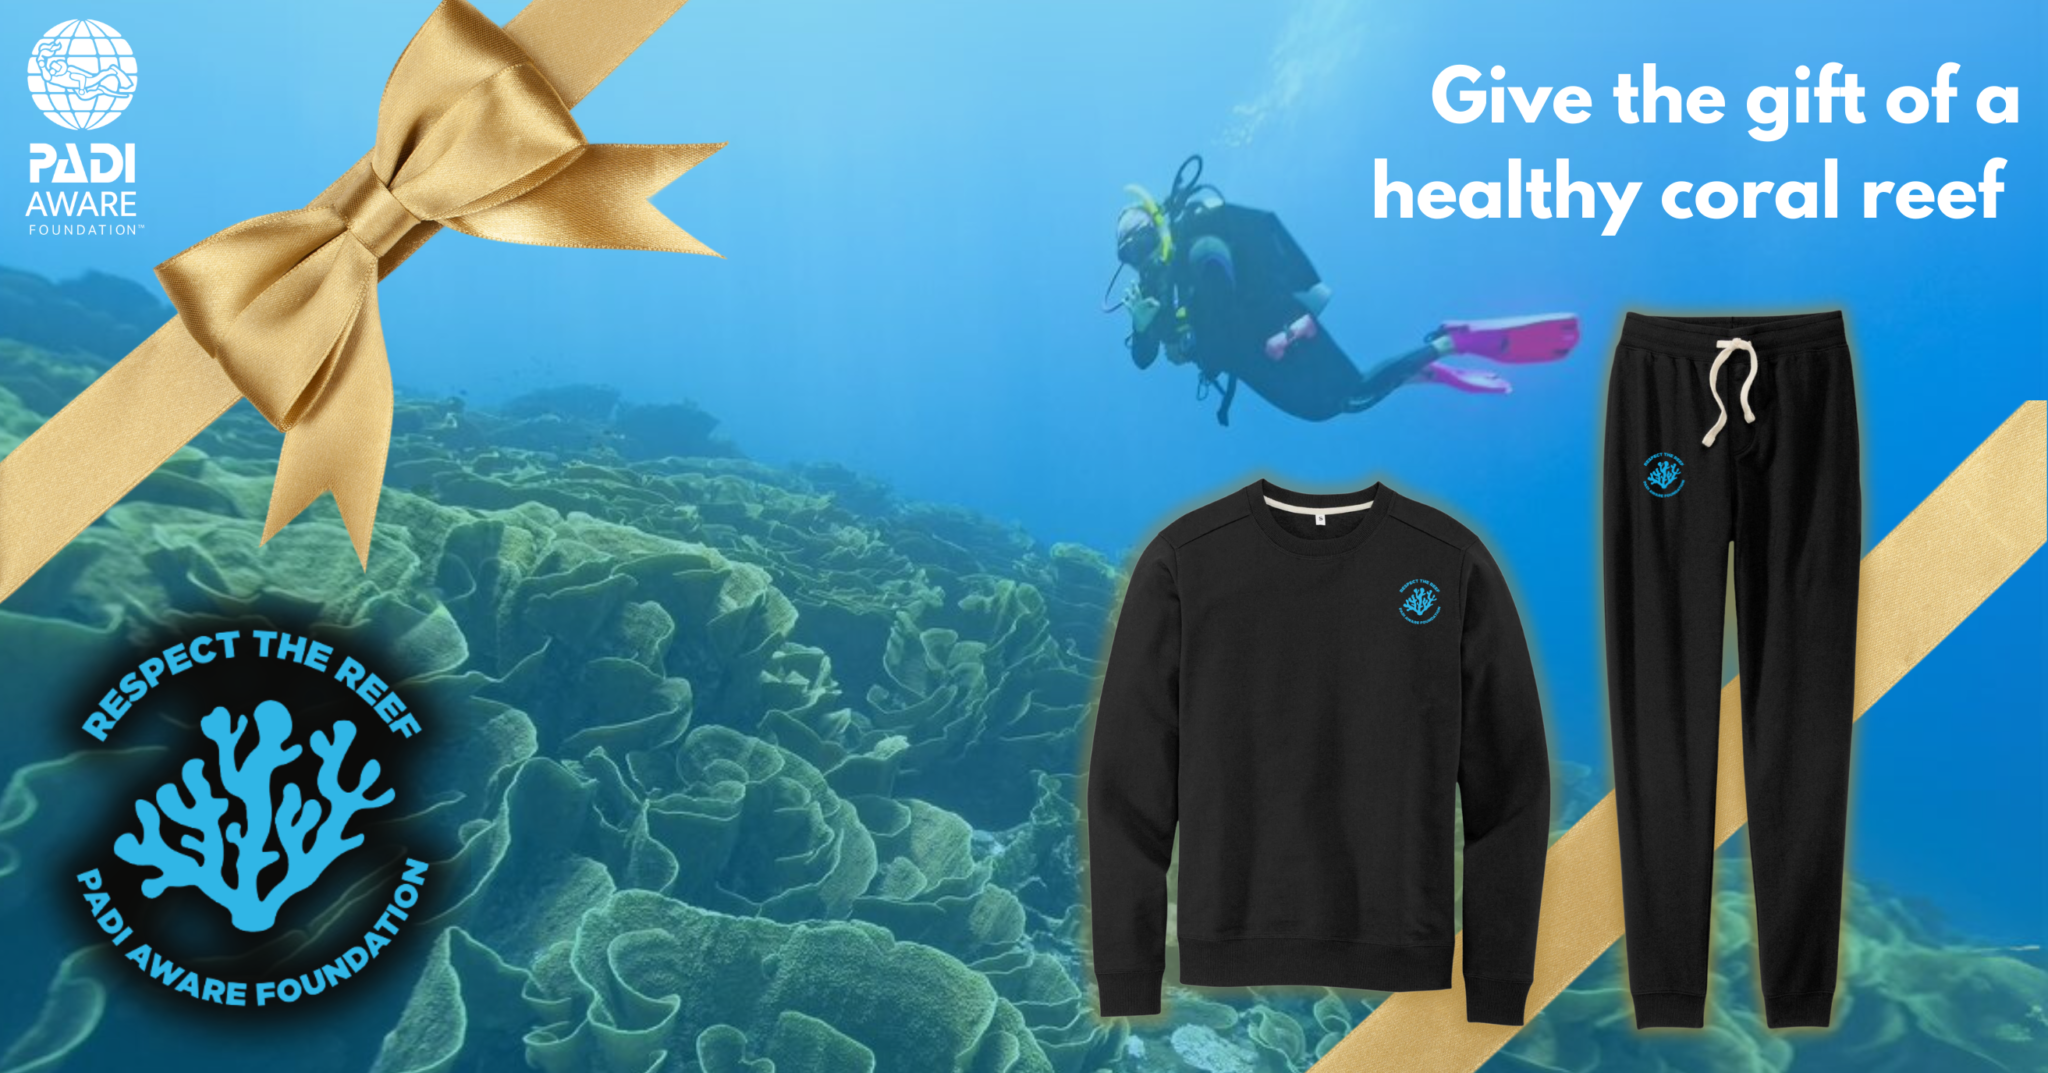 make a donation to padi aware and get a free gift